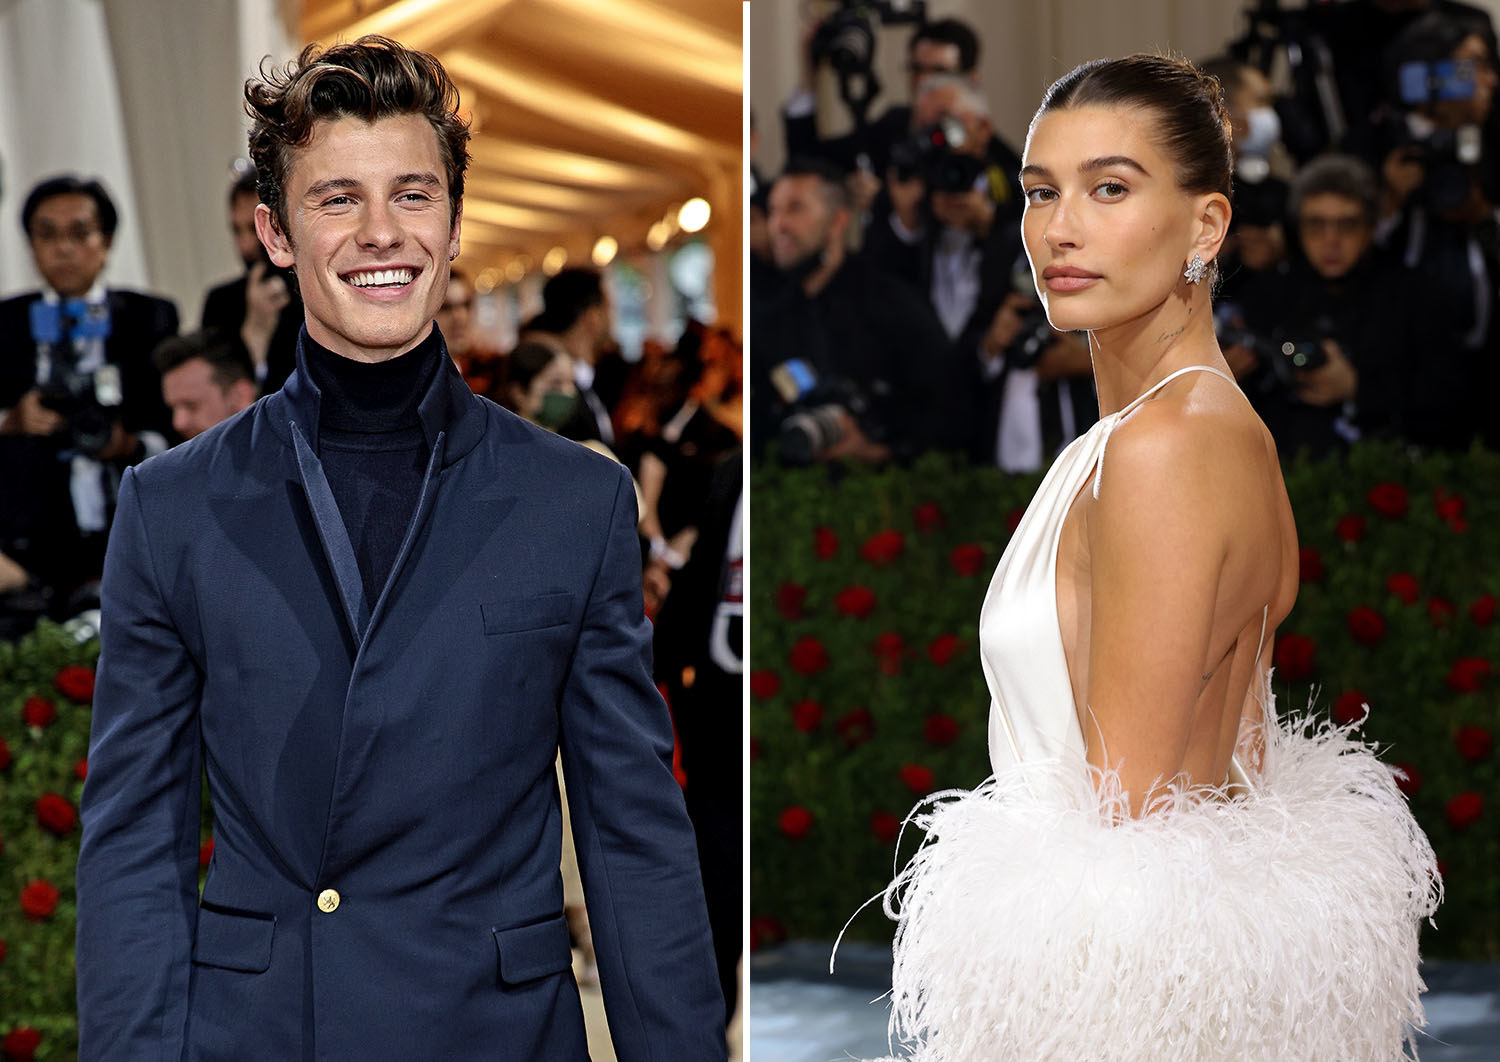 Shawn Mendes smiles in a suit; Hailey Bieber stands and looks to the side on the red carpet